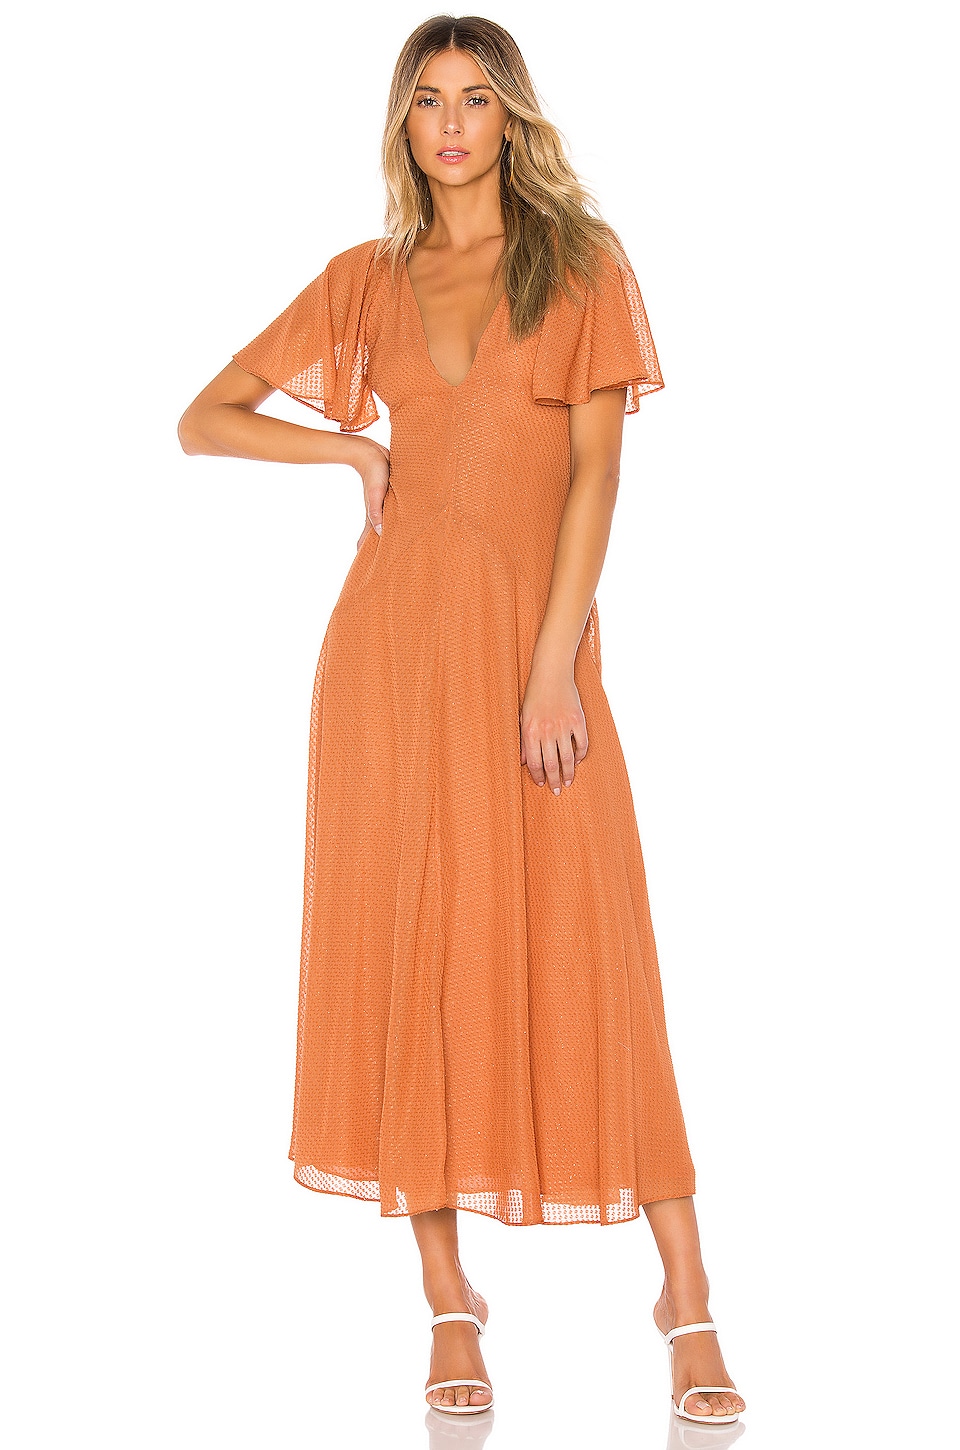 house of harlow maxi dress